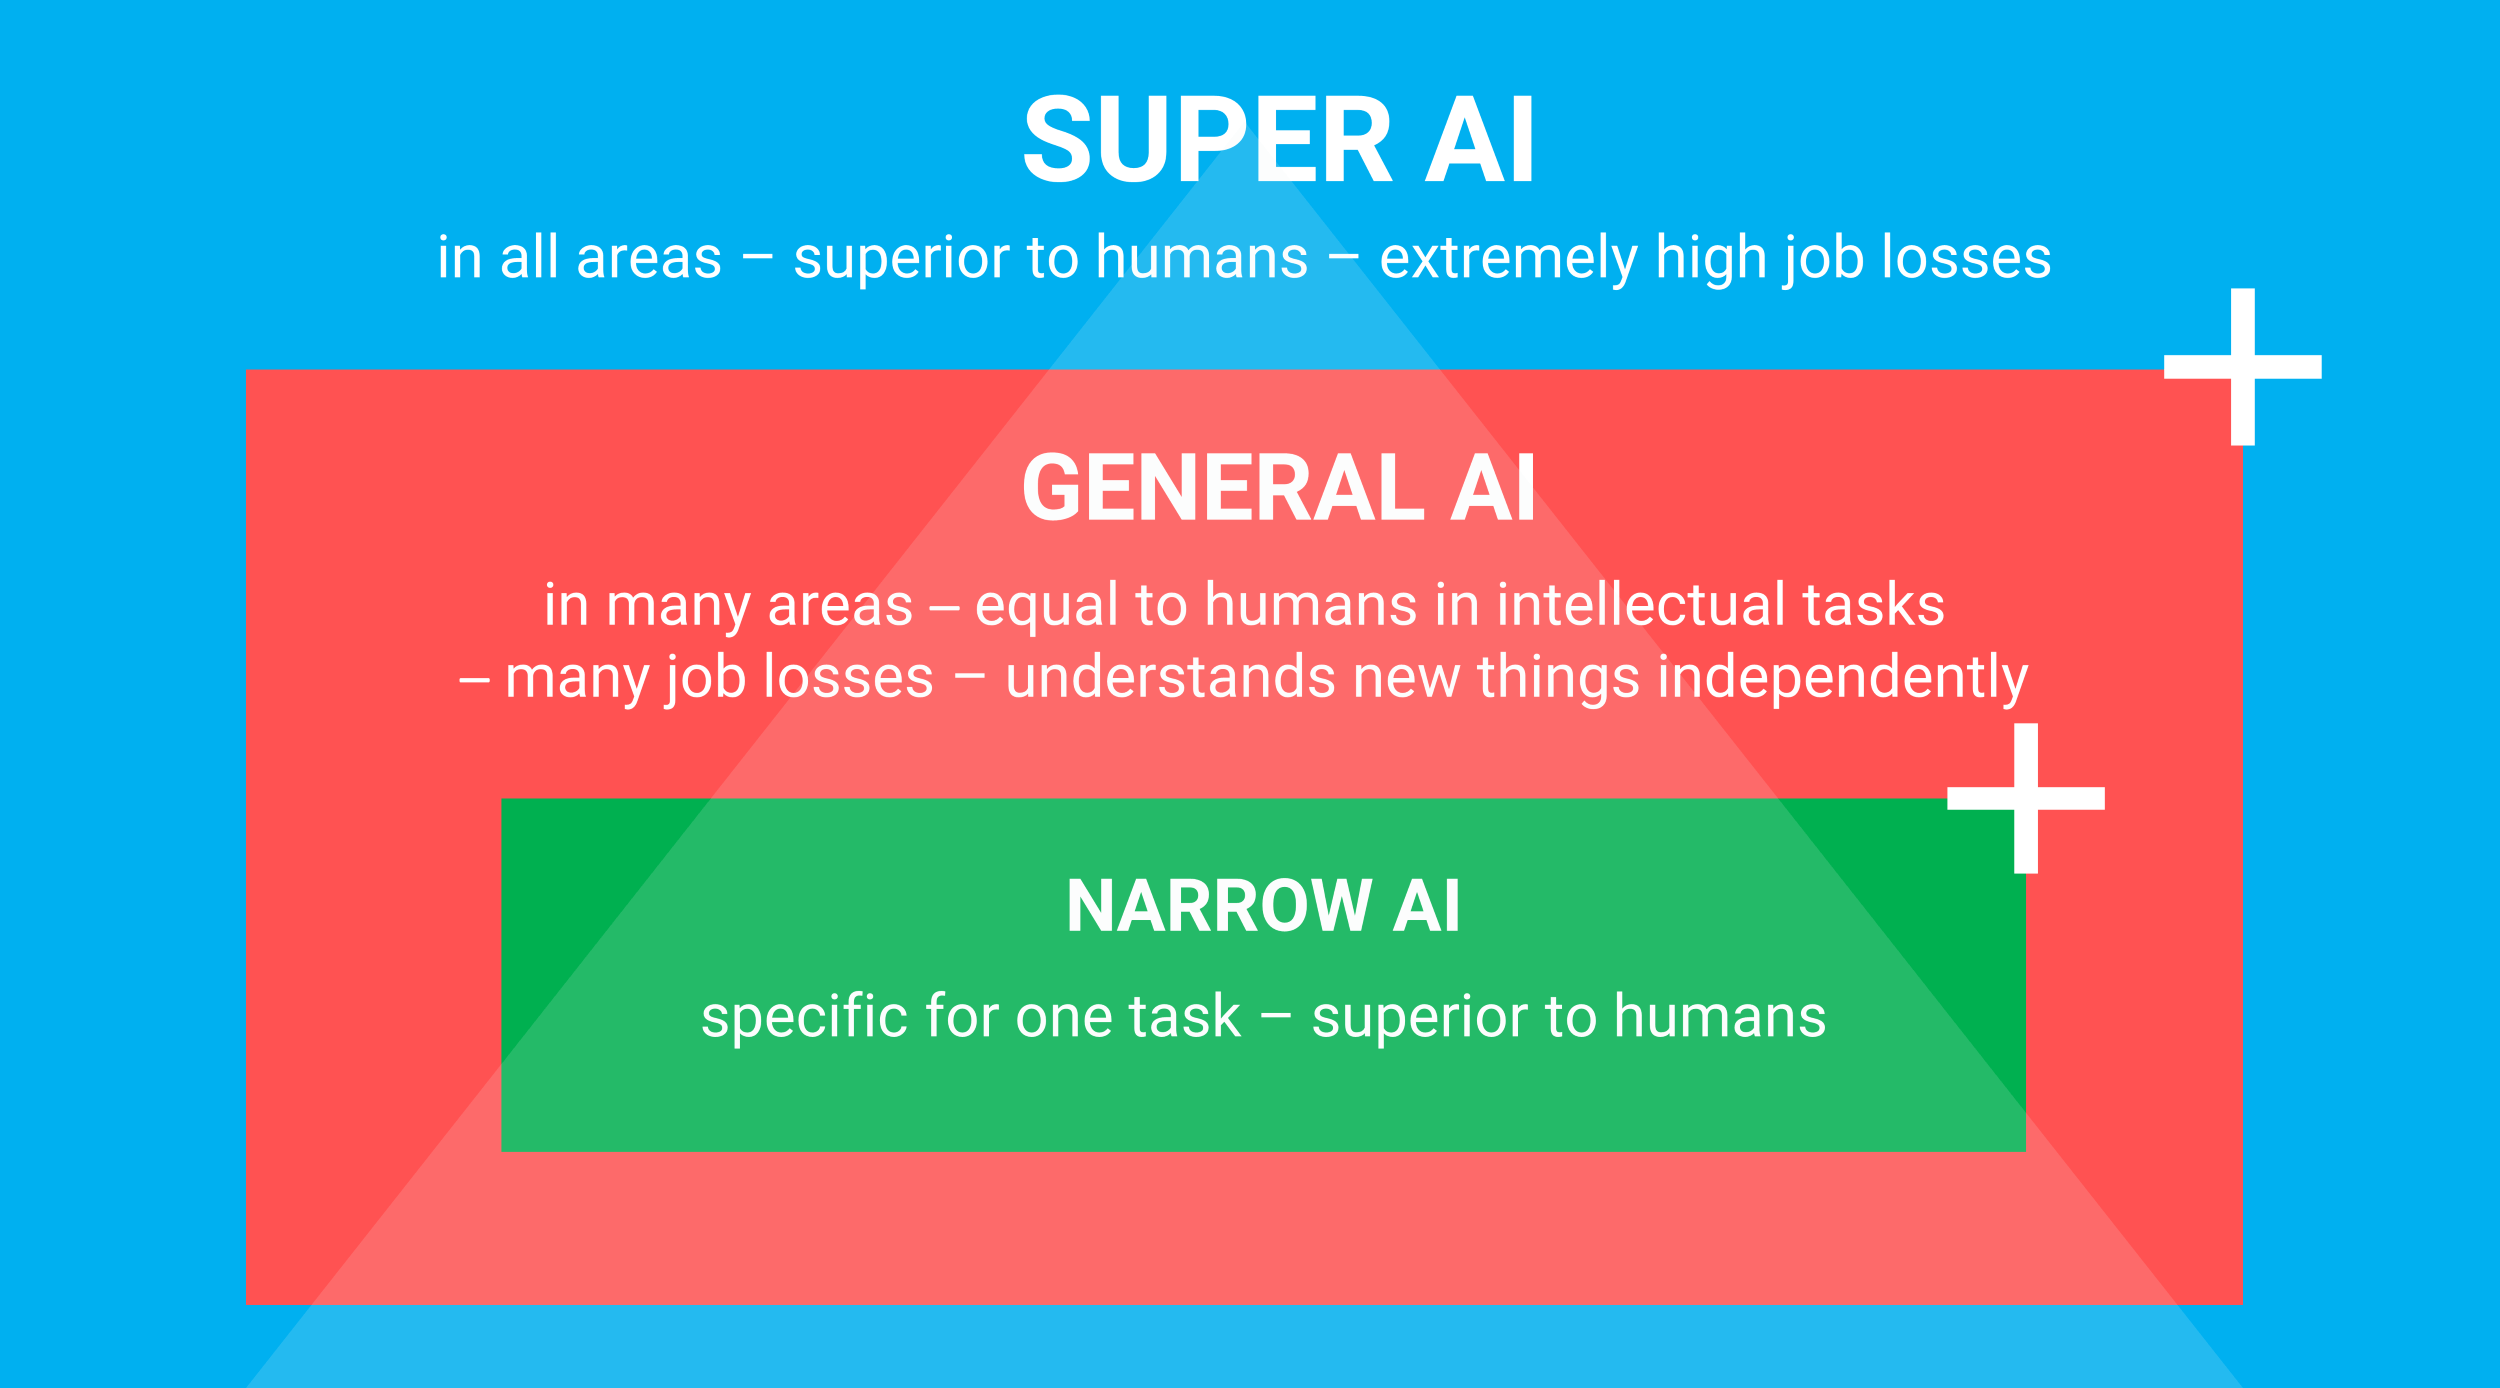 The different types of AI